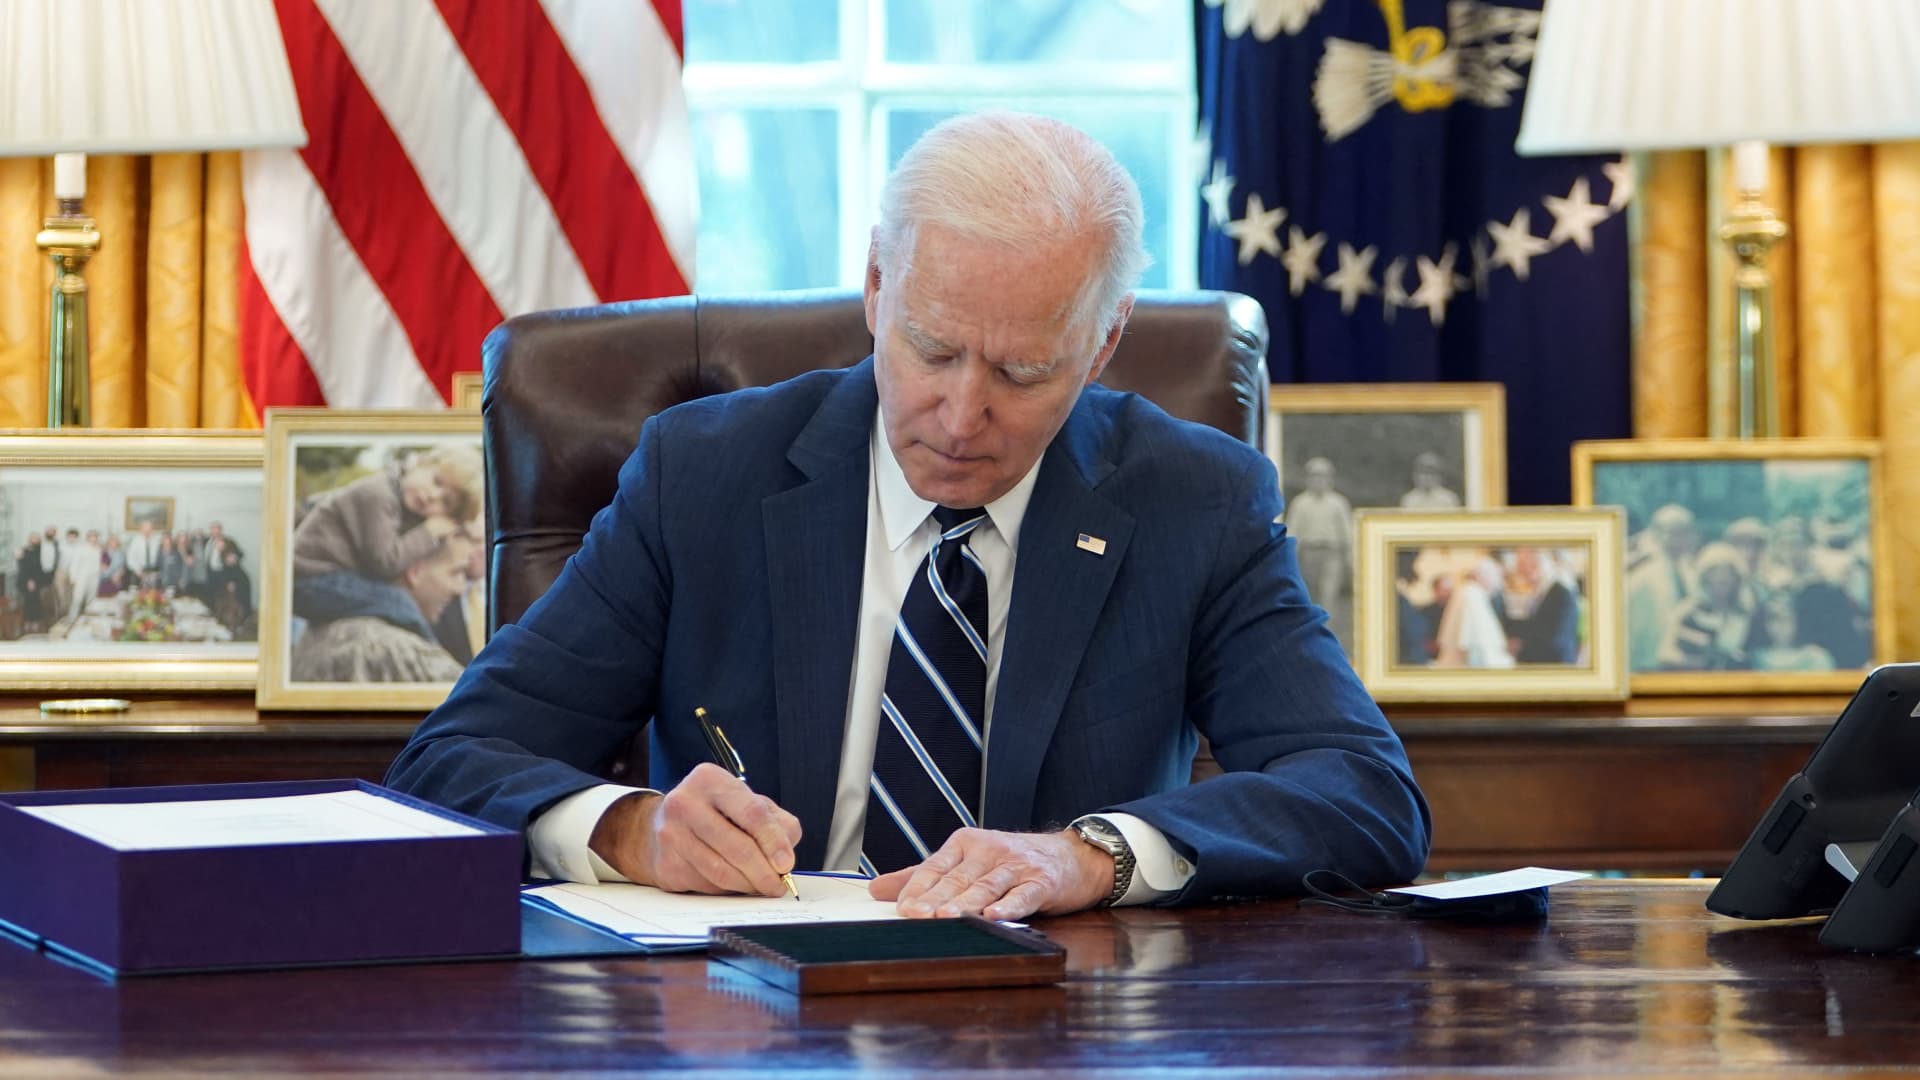 President Joe Biden signs the American Rescue Plan on March 11, 2021, in the Oval Office of the White House in Washington, DC.